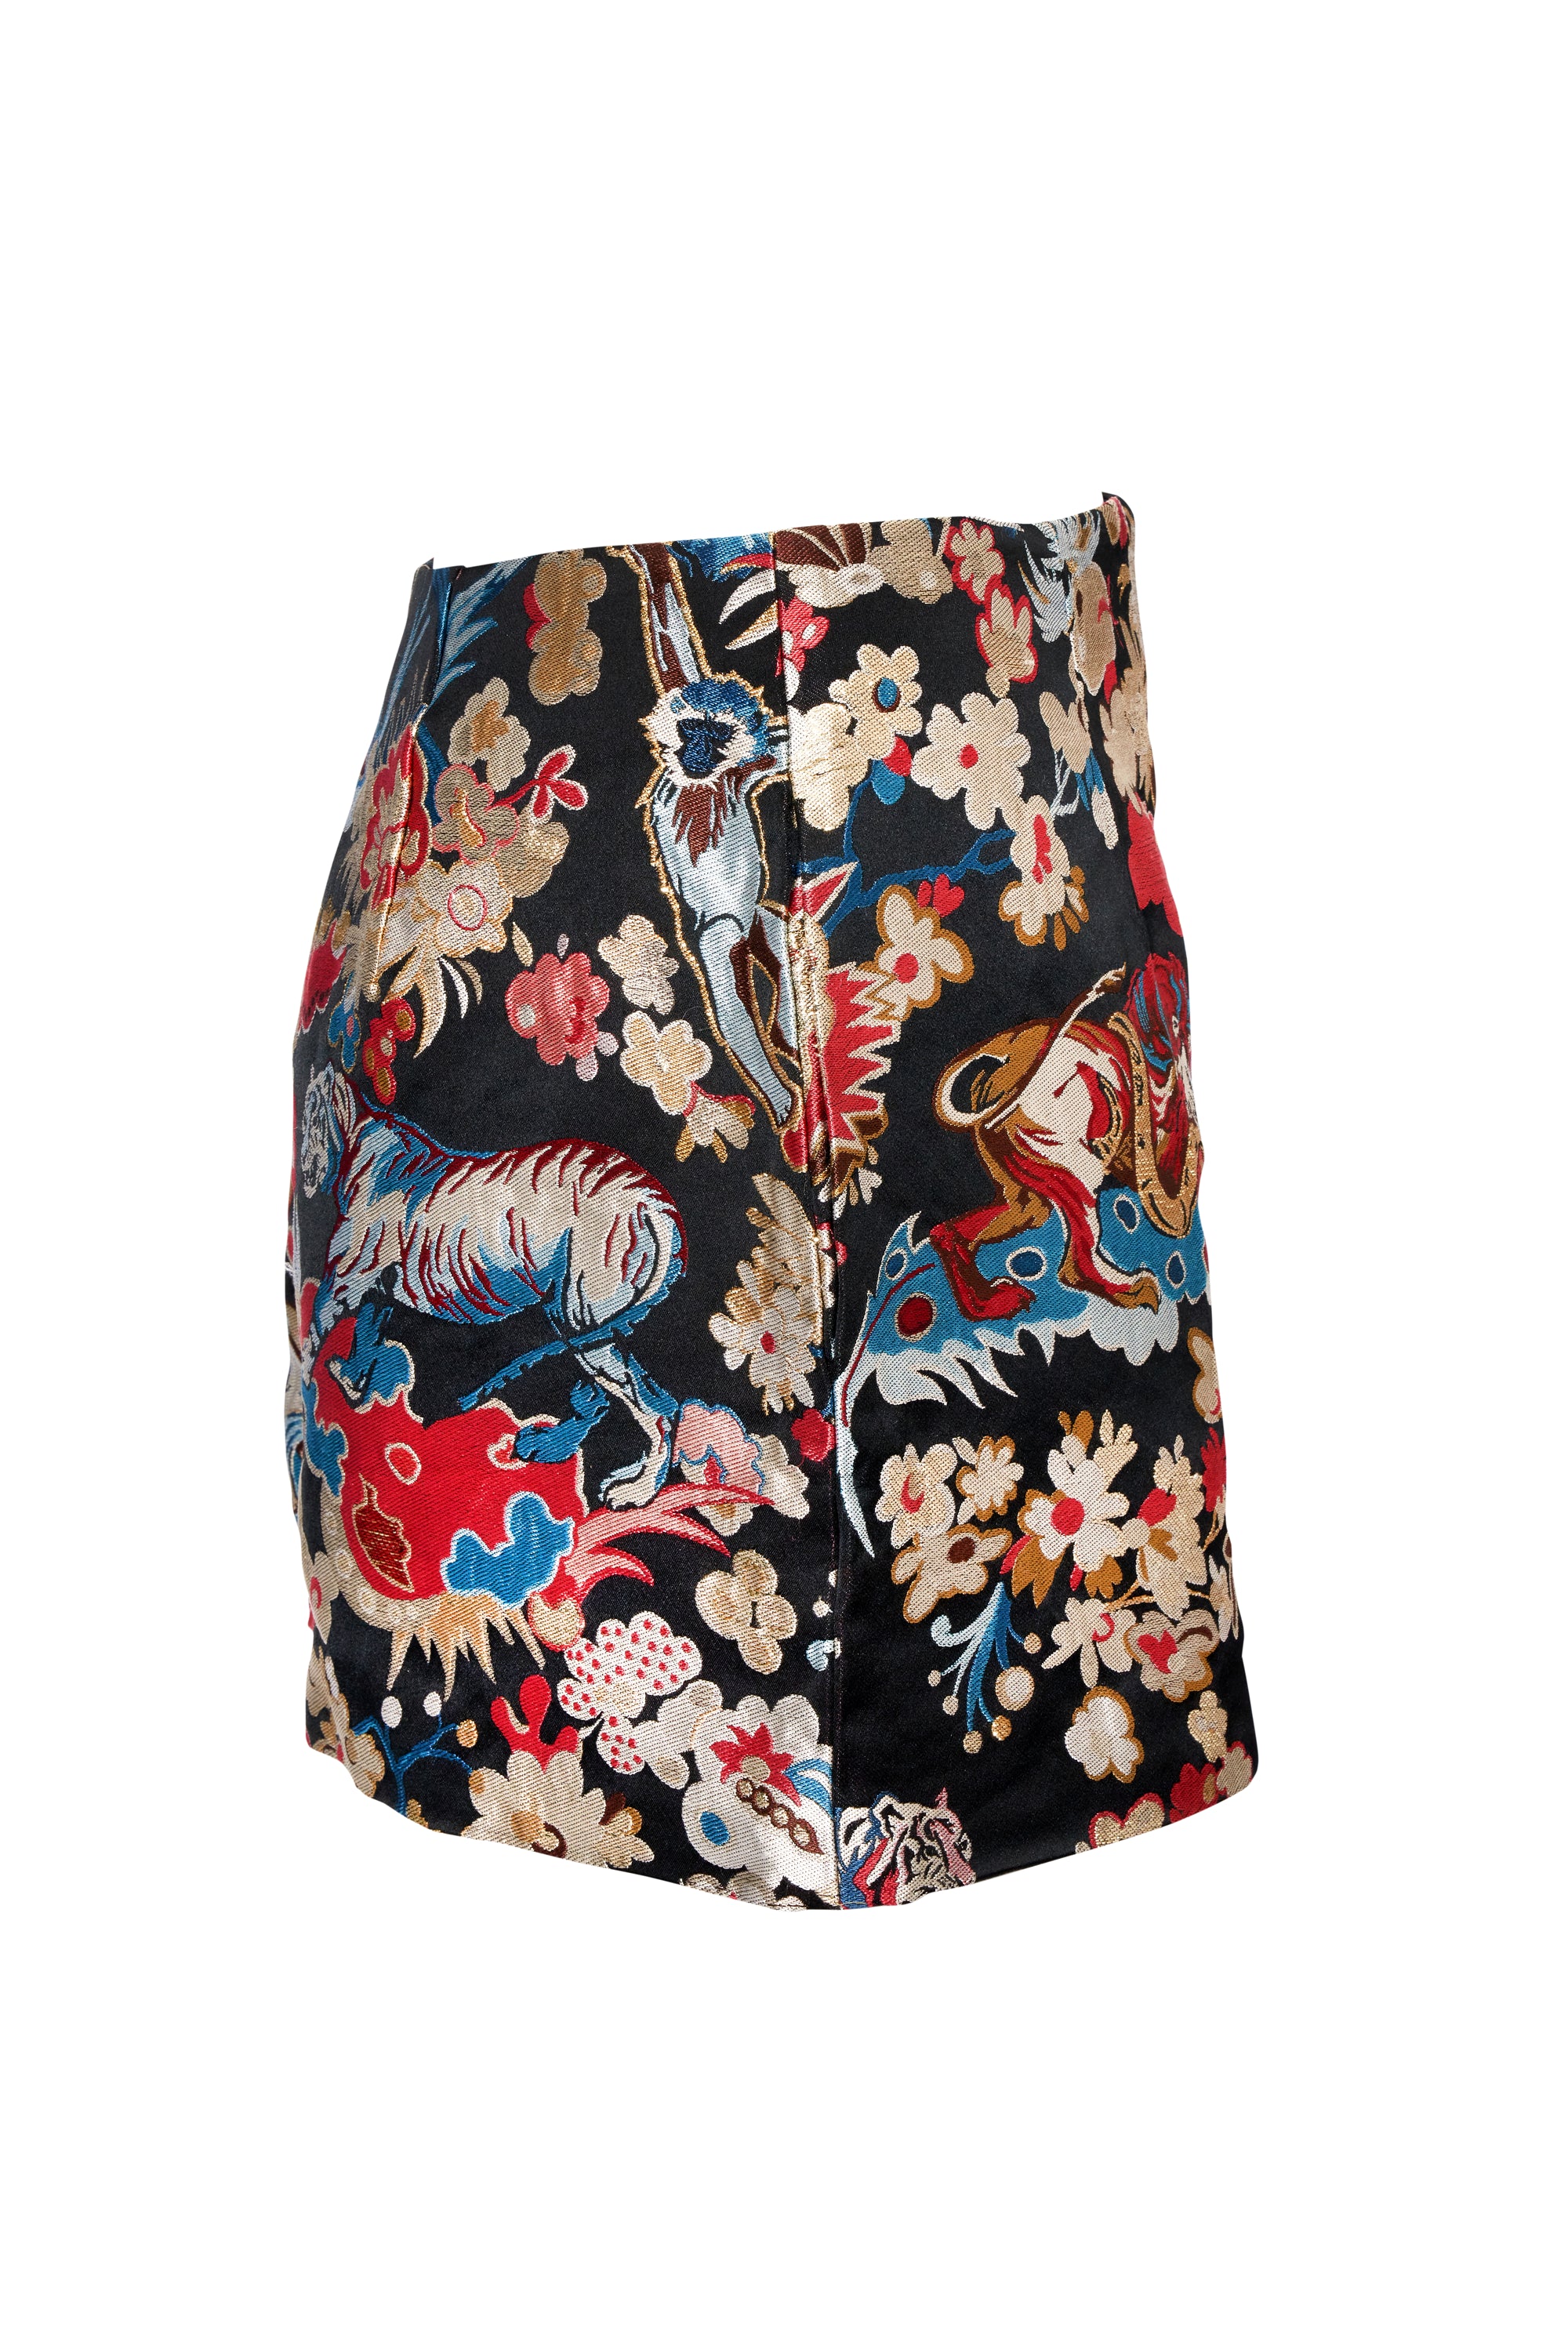 Christian Dior Brocade Lion and Tiger Pattern Shorts